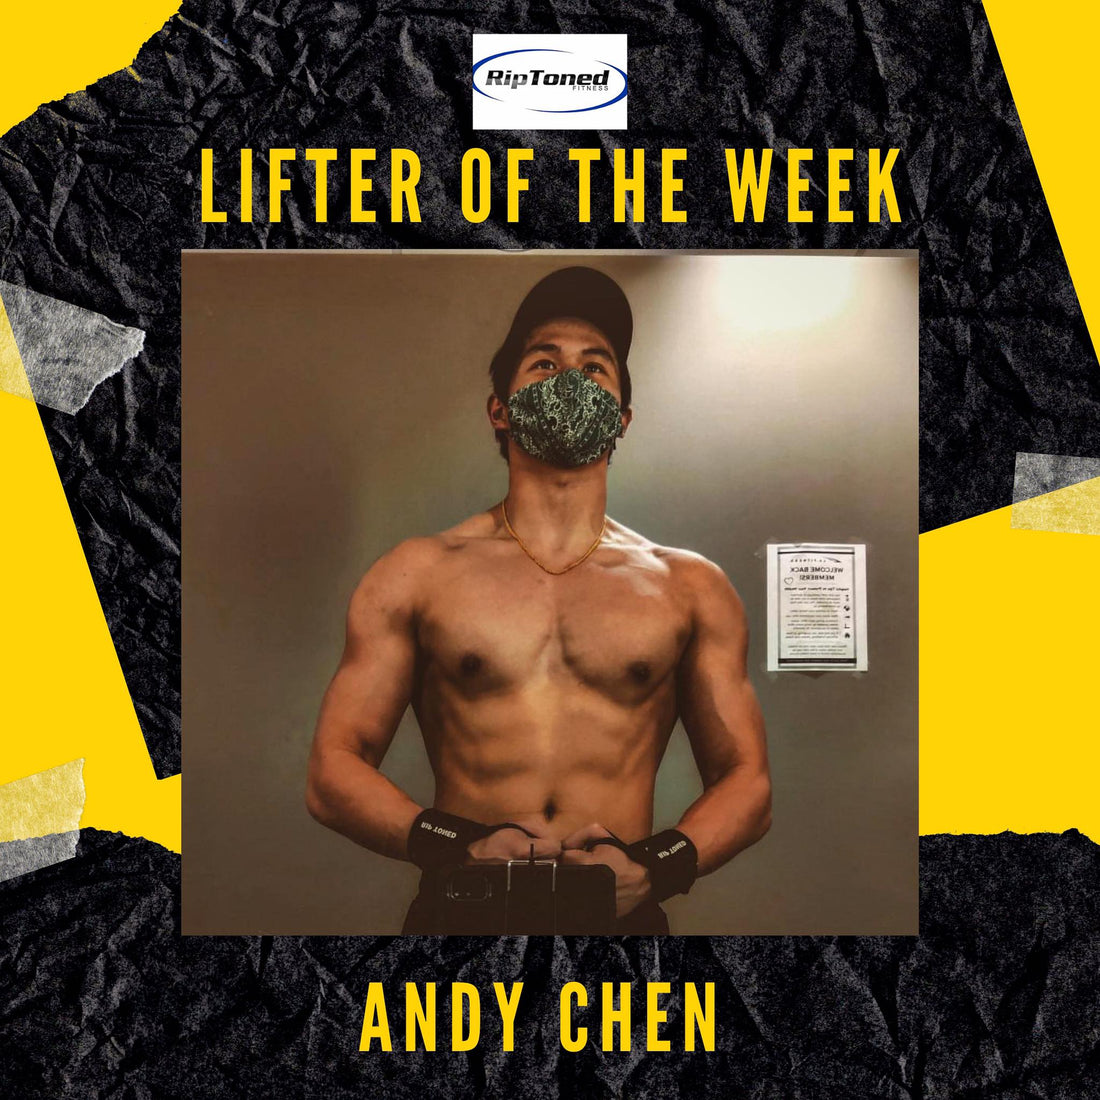 Lifter of the Week - Andy Chen - Rip Toned